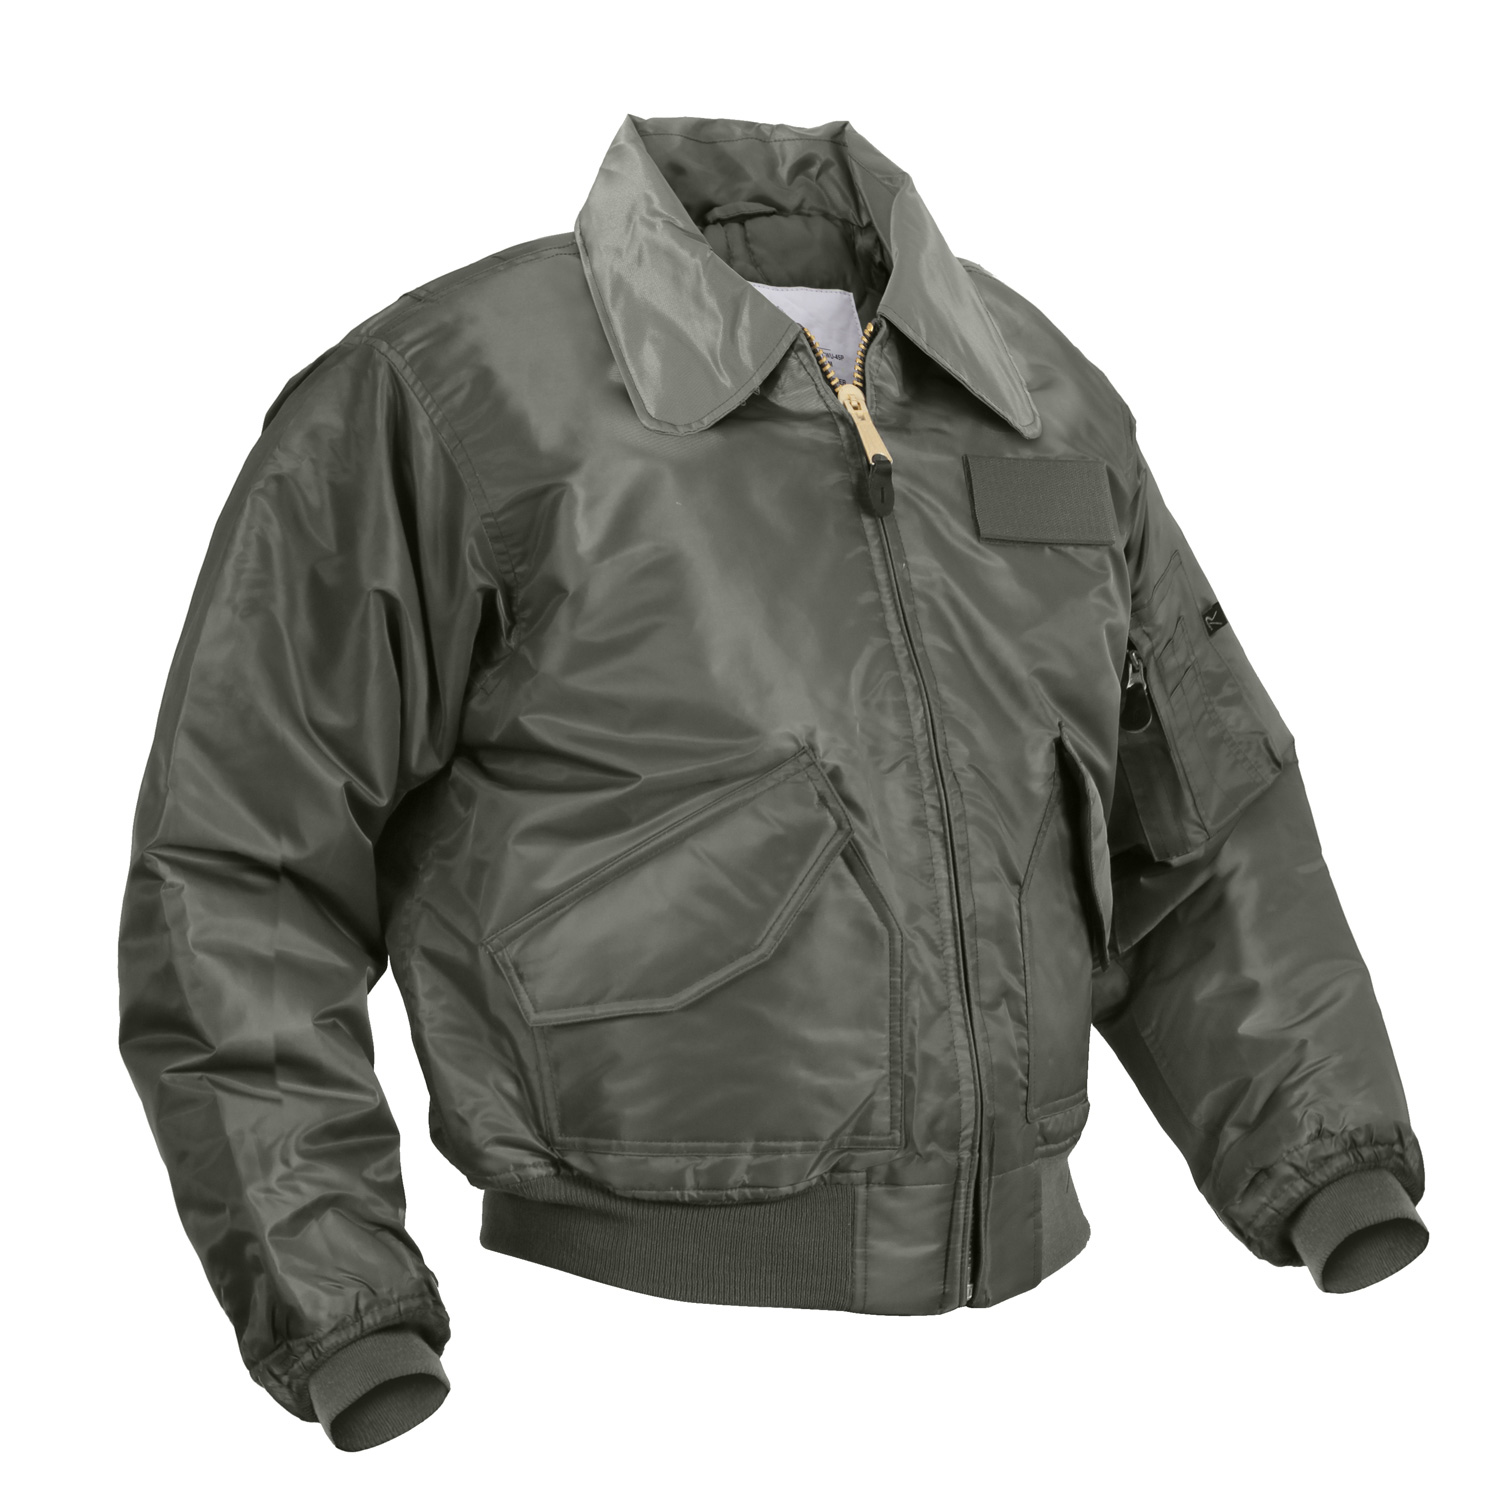 Rothco Cwu 45p Flight Jacket Up To 27 Off 4 Star Rating W Free Shipping And Handling